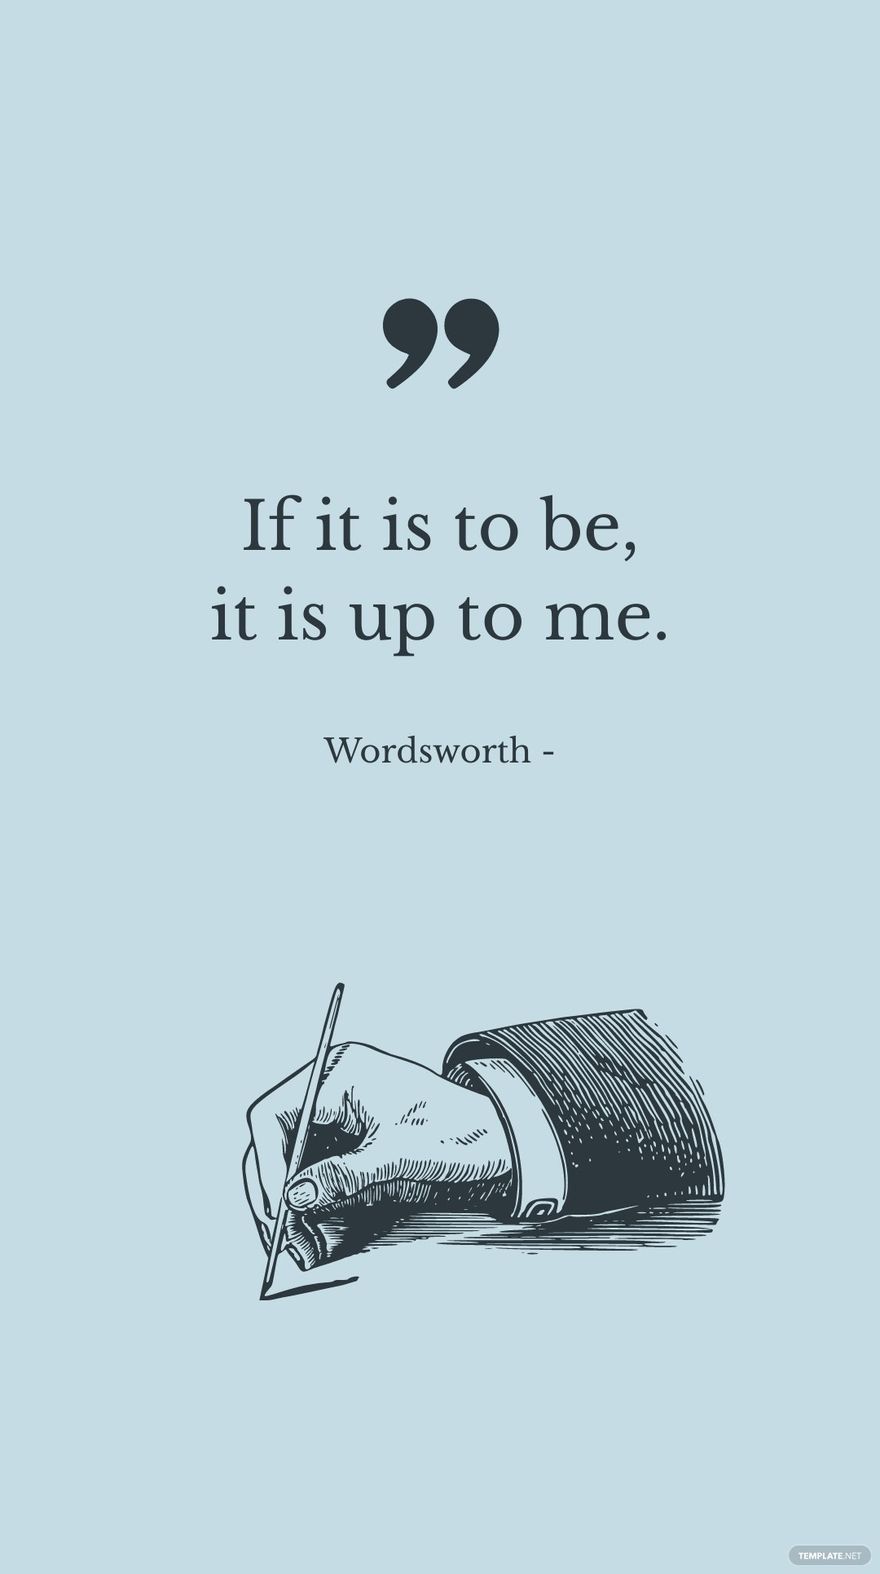 Wordsworth - If it is to be, it is up to me. in JPG